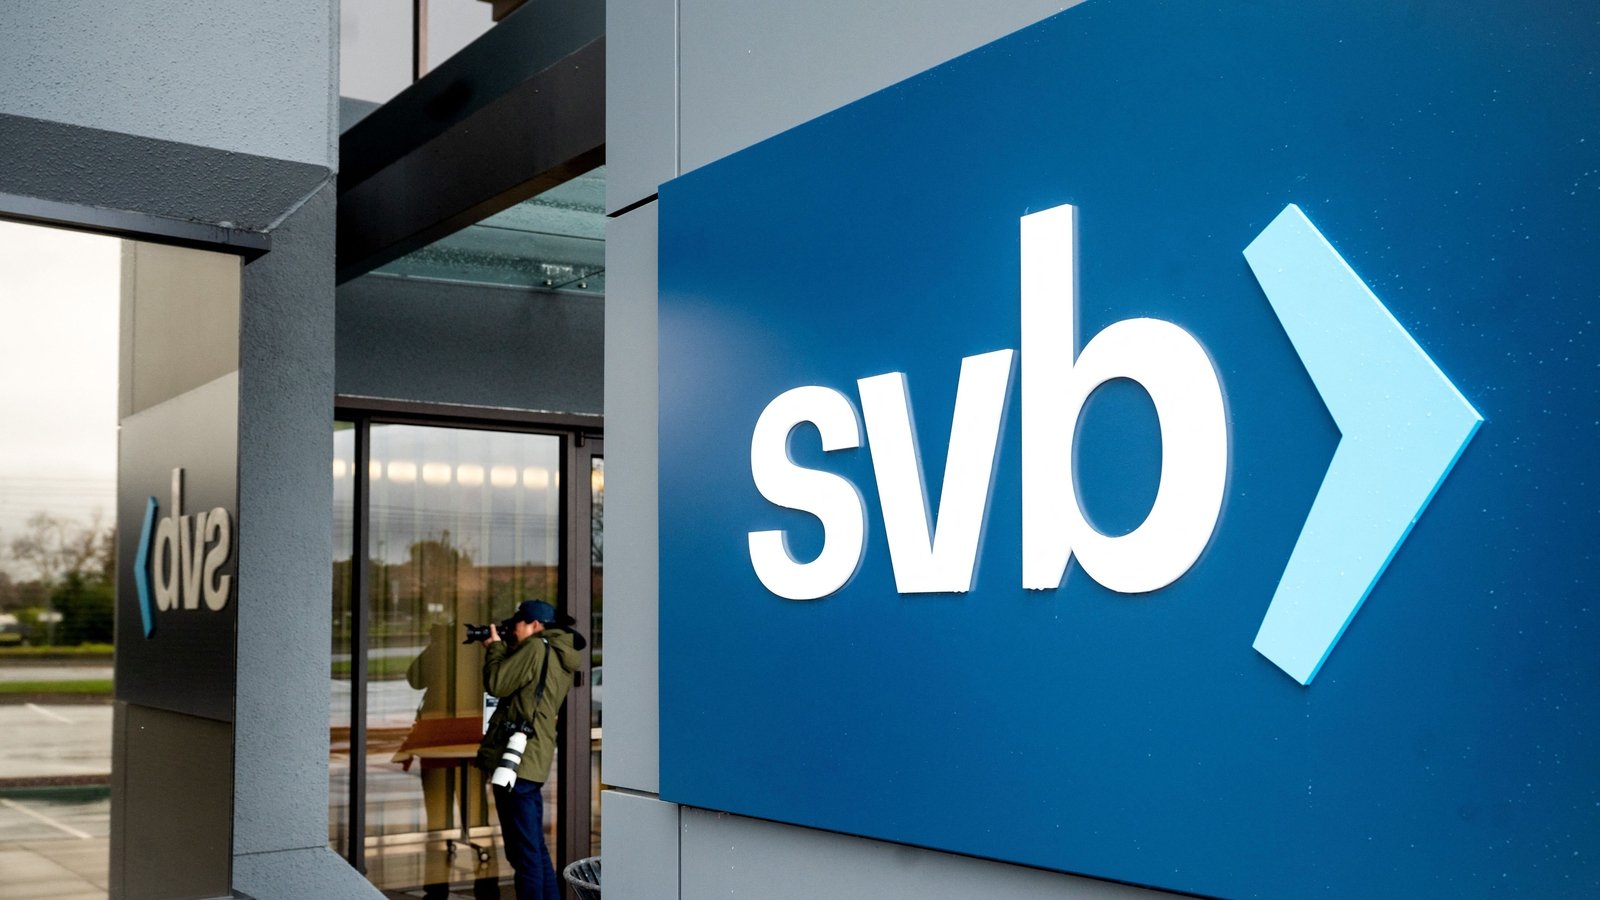 Signature Bank becomes next casualty of banking turmoil after SVB